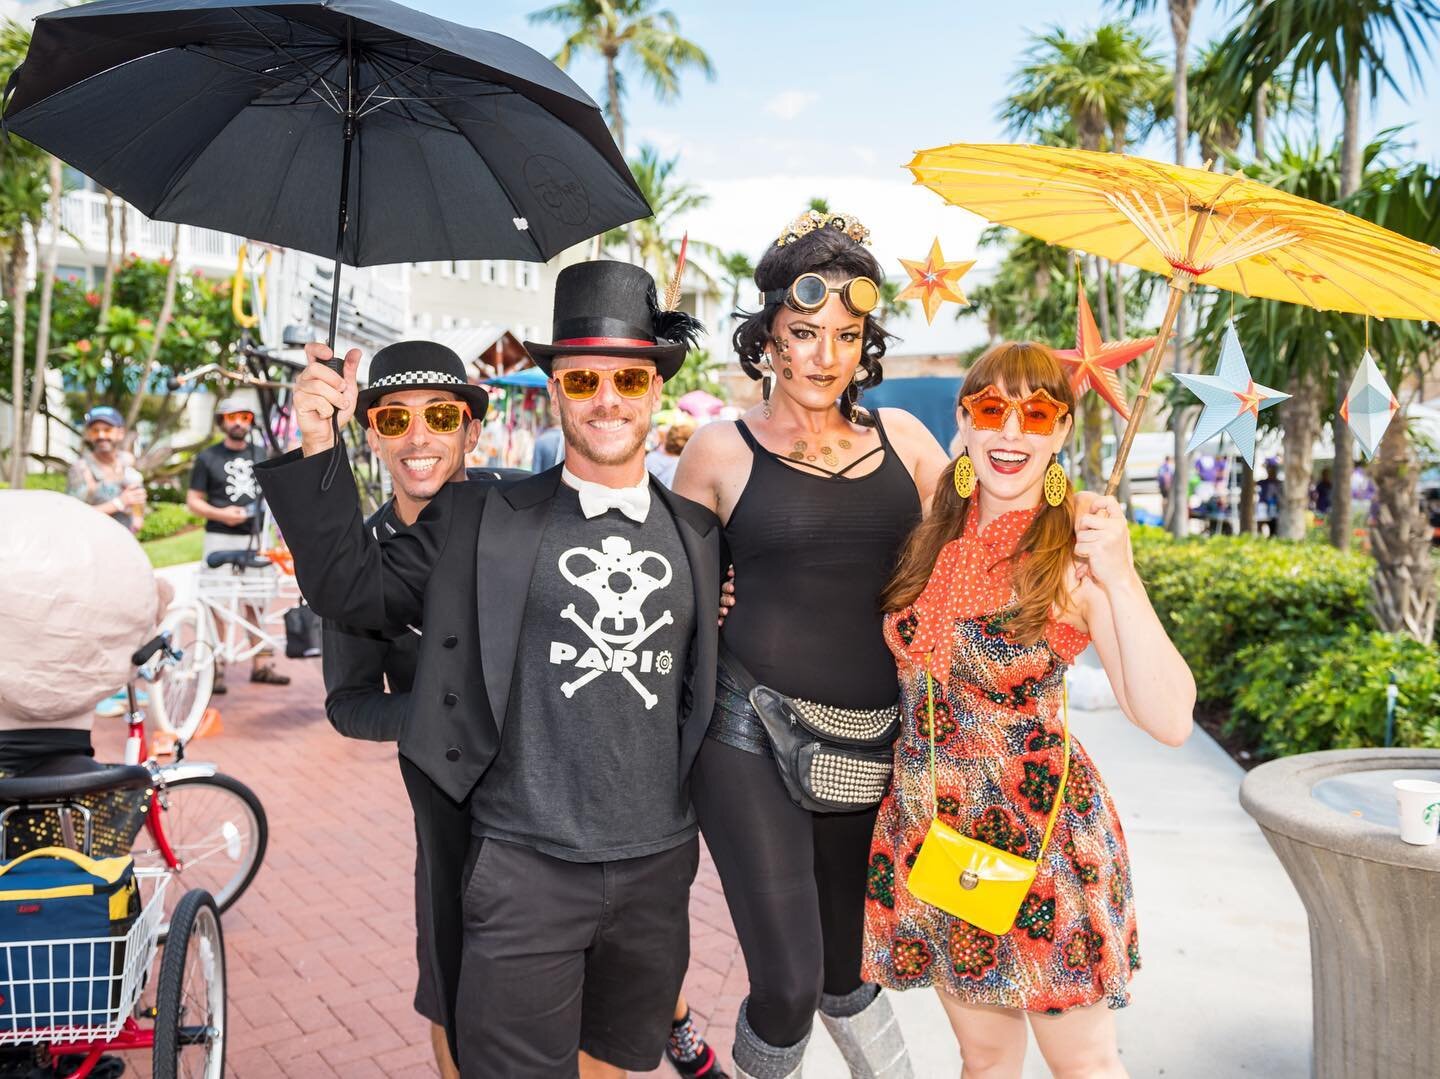 Grab your pals and get ready to parrrrrty PAPIO STYLE. 😎
.
Pre-party line up at the Custom House and after party at the southernmost pocket park. The parade cruises down Duval at high NOON.
.
See you Saturday! 🔅
.
.
.
.
.
.
.
#keywest #floridafun #